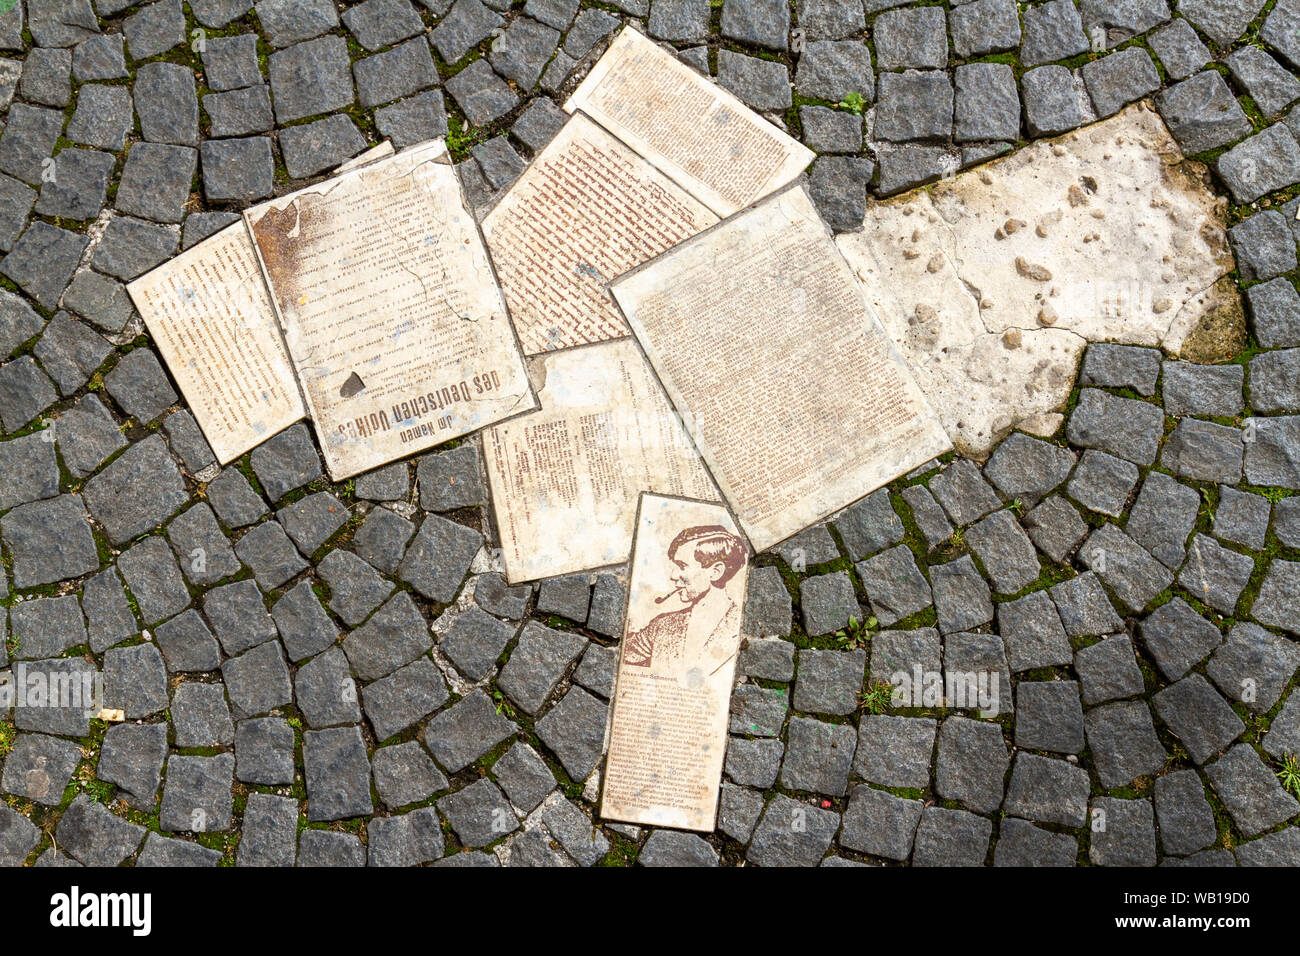 White Rose memorial of leaflets scattered on the pavement outside Ludwig Maximilian University building in Munich, Germany. Stock Photo